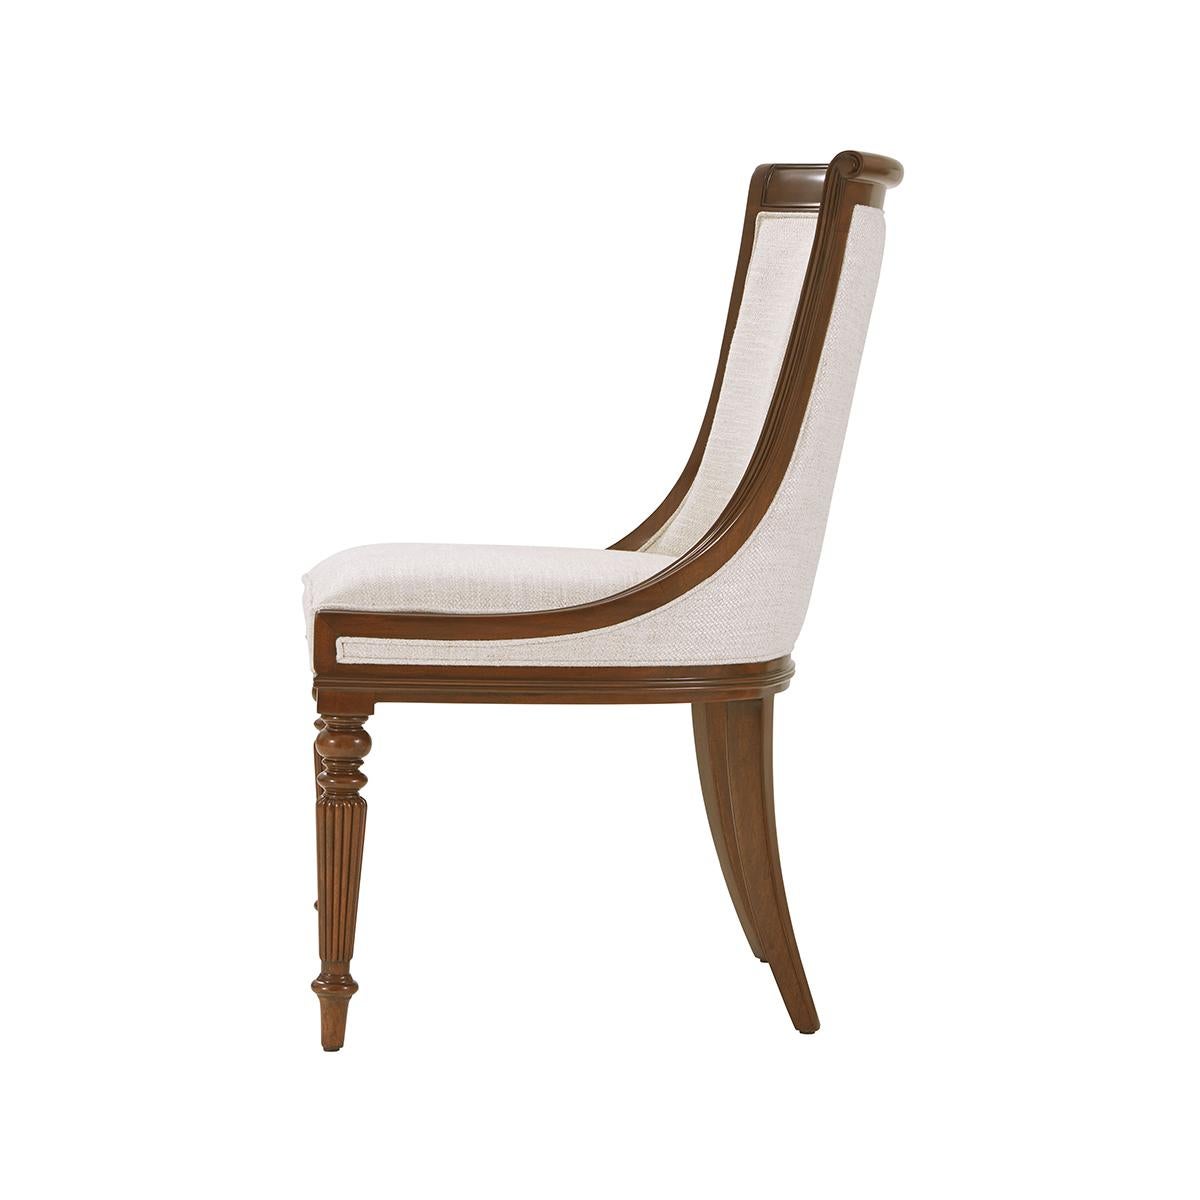 Vietnamese Regency Mahogany Dining Chairs For Sale